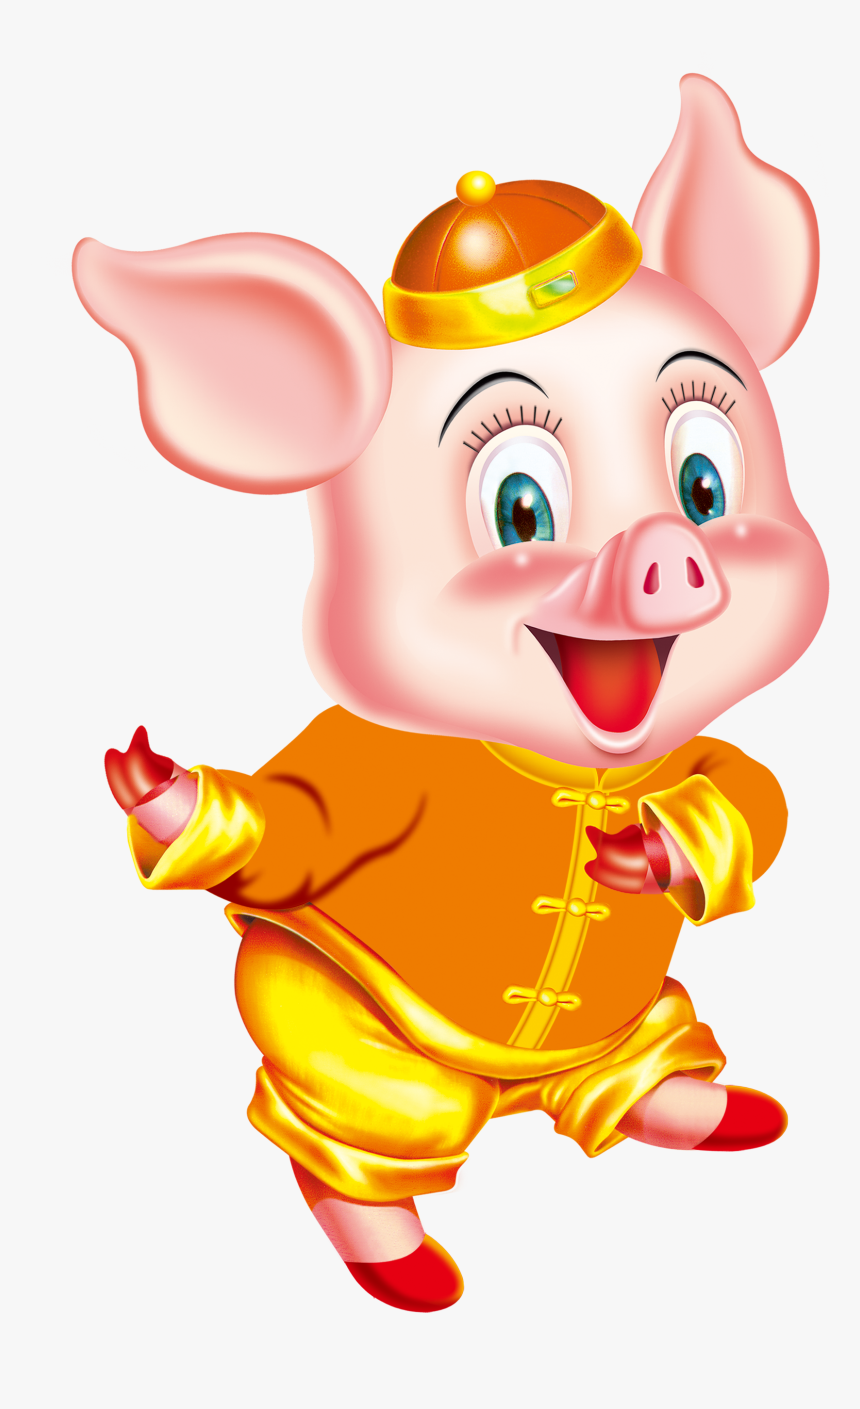 Feng Fortune-telling Chinese Pig